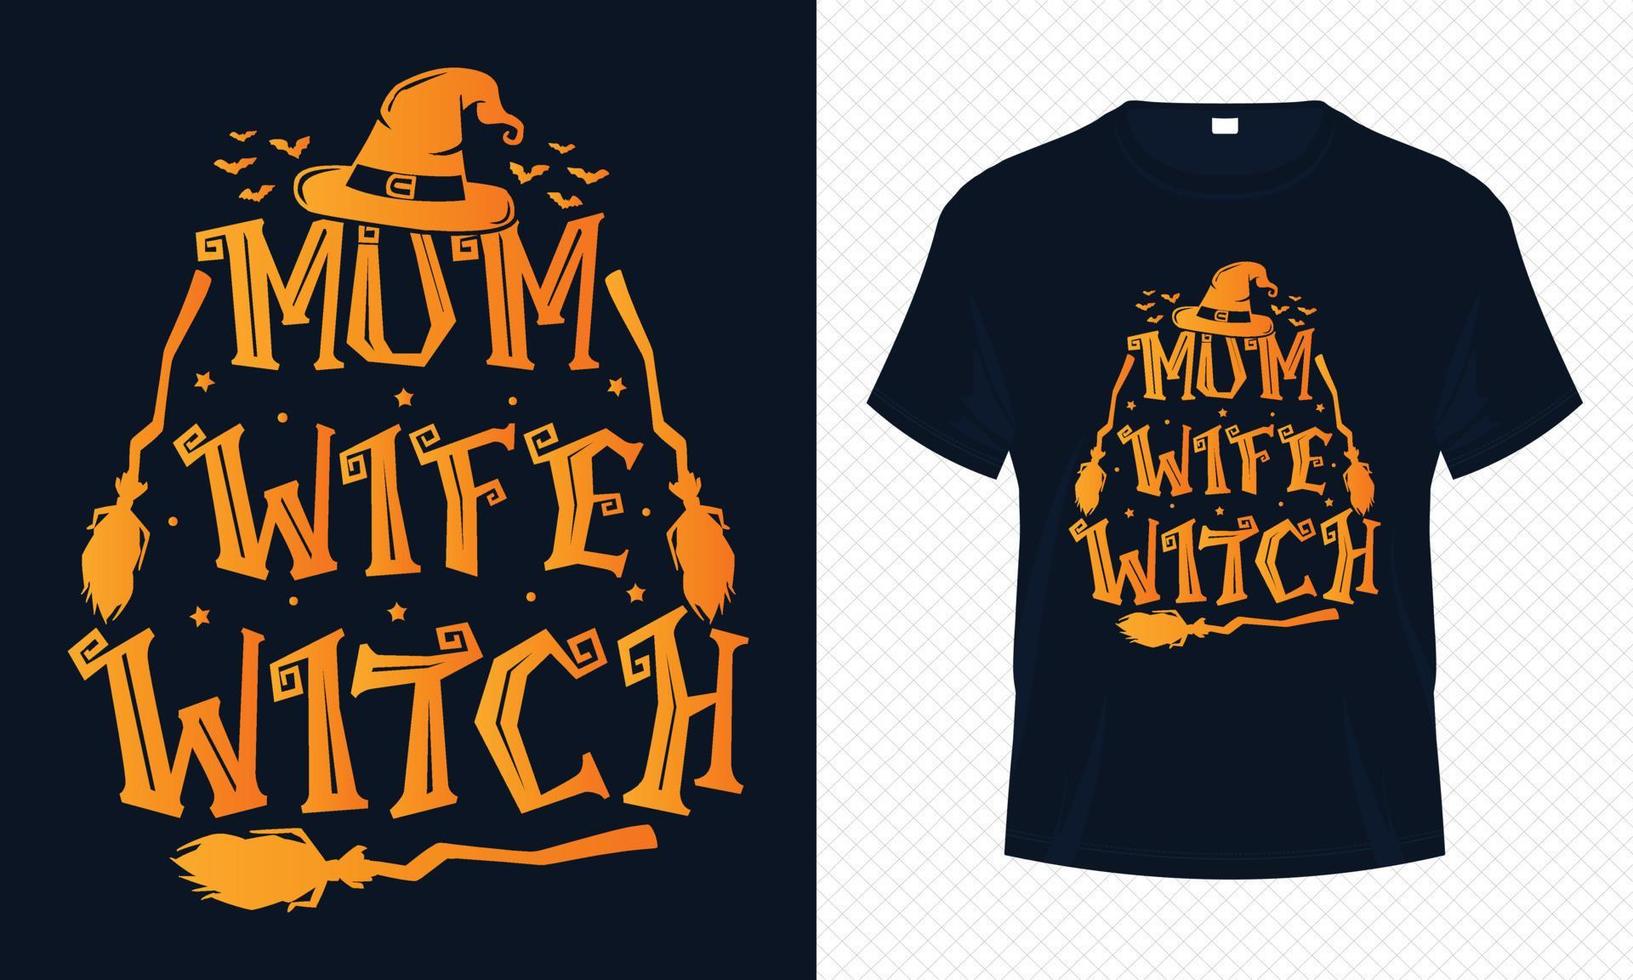 Mom Wife Witch - Happy Halloween t-shirt design vector template. Witch t-shirt design for Halloween day. Printable Halloween vector design of hat, bat, broomstick.